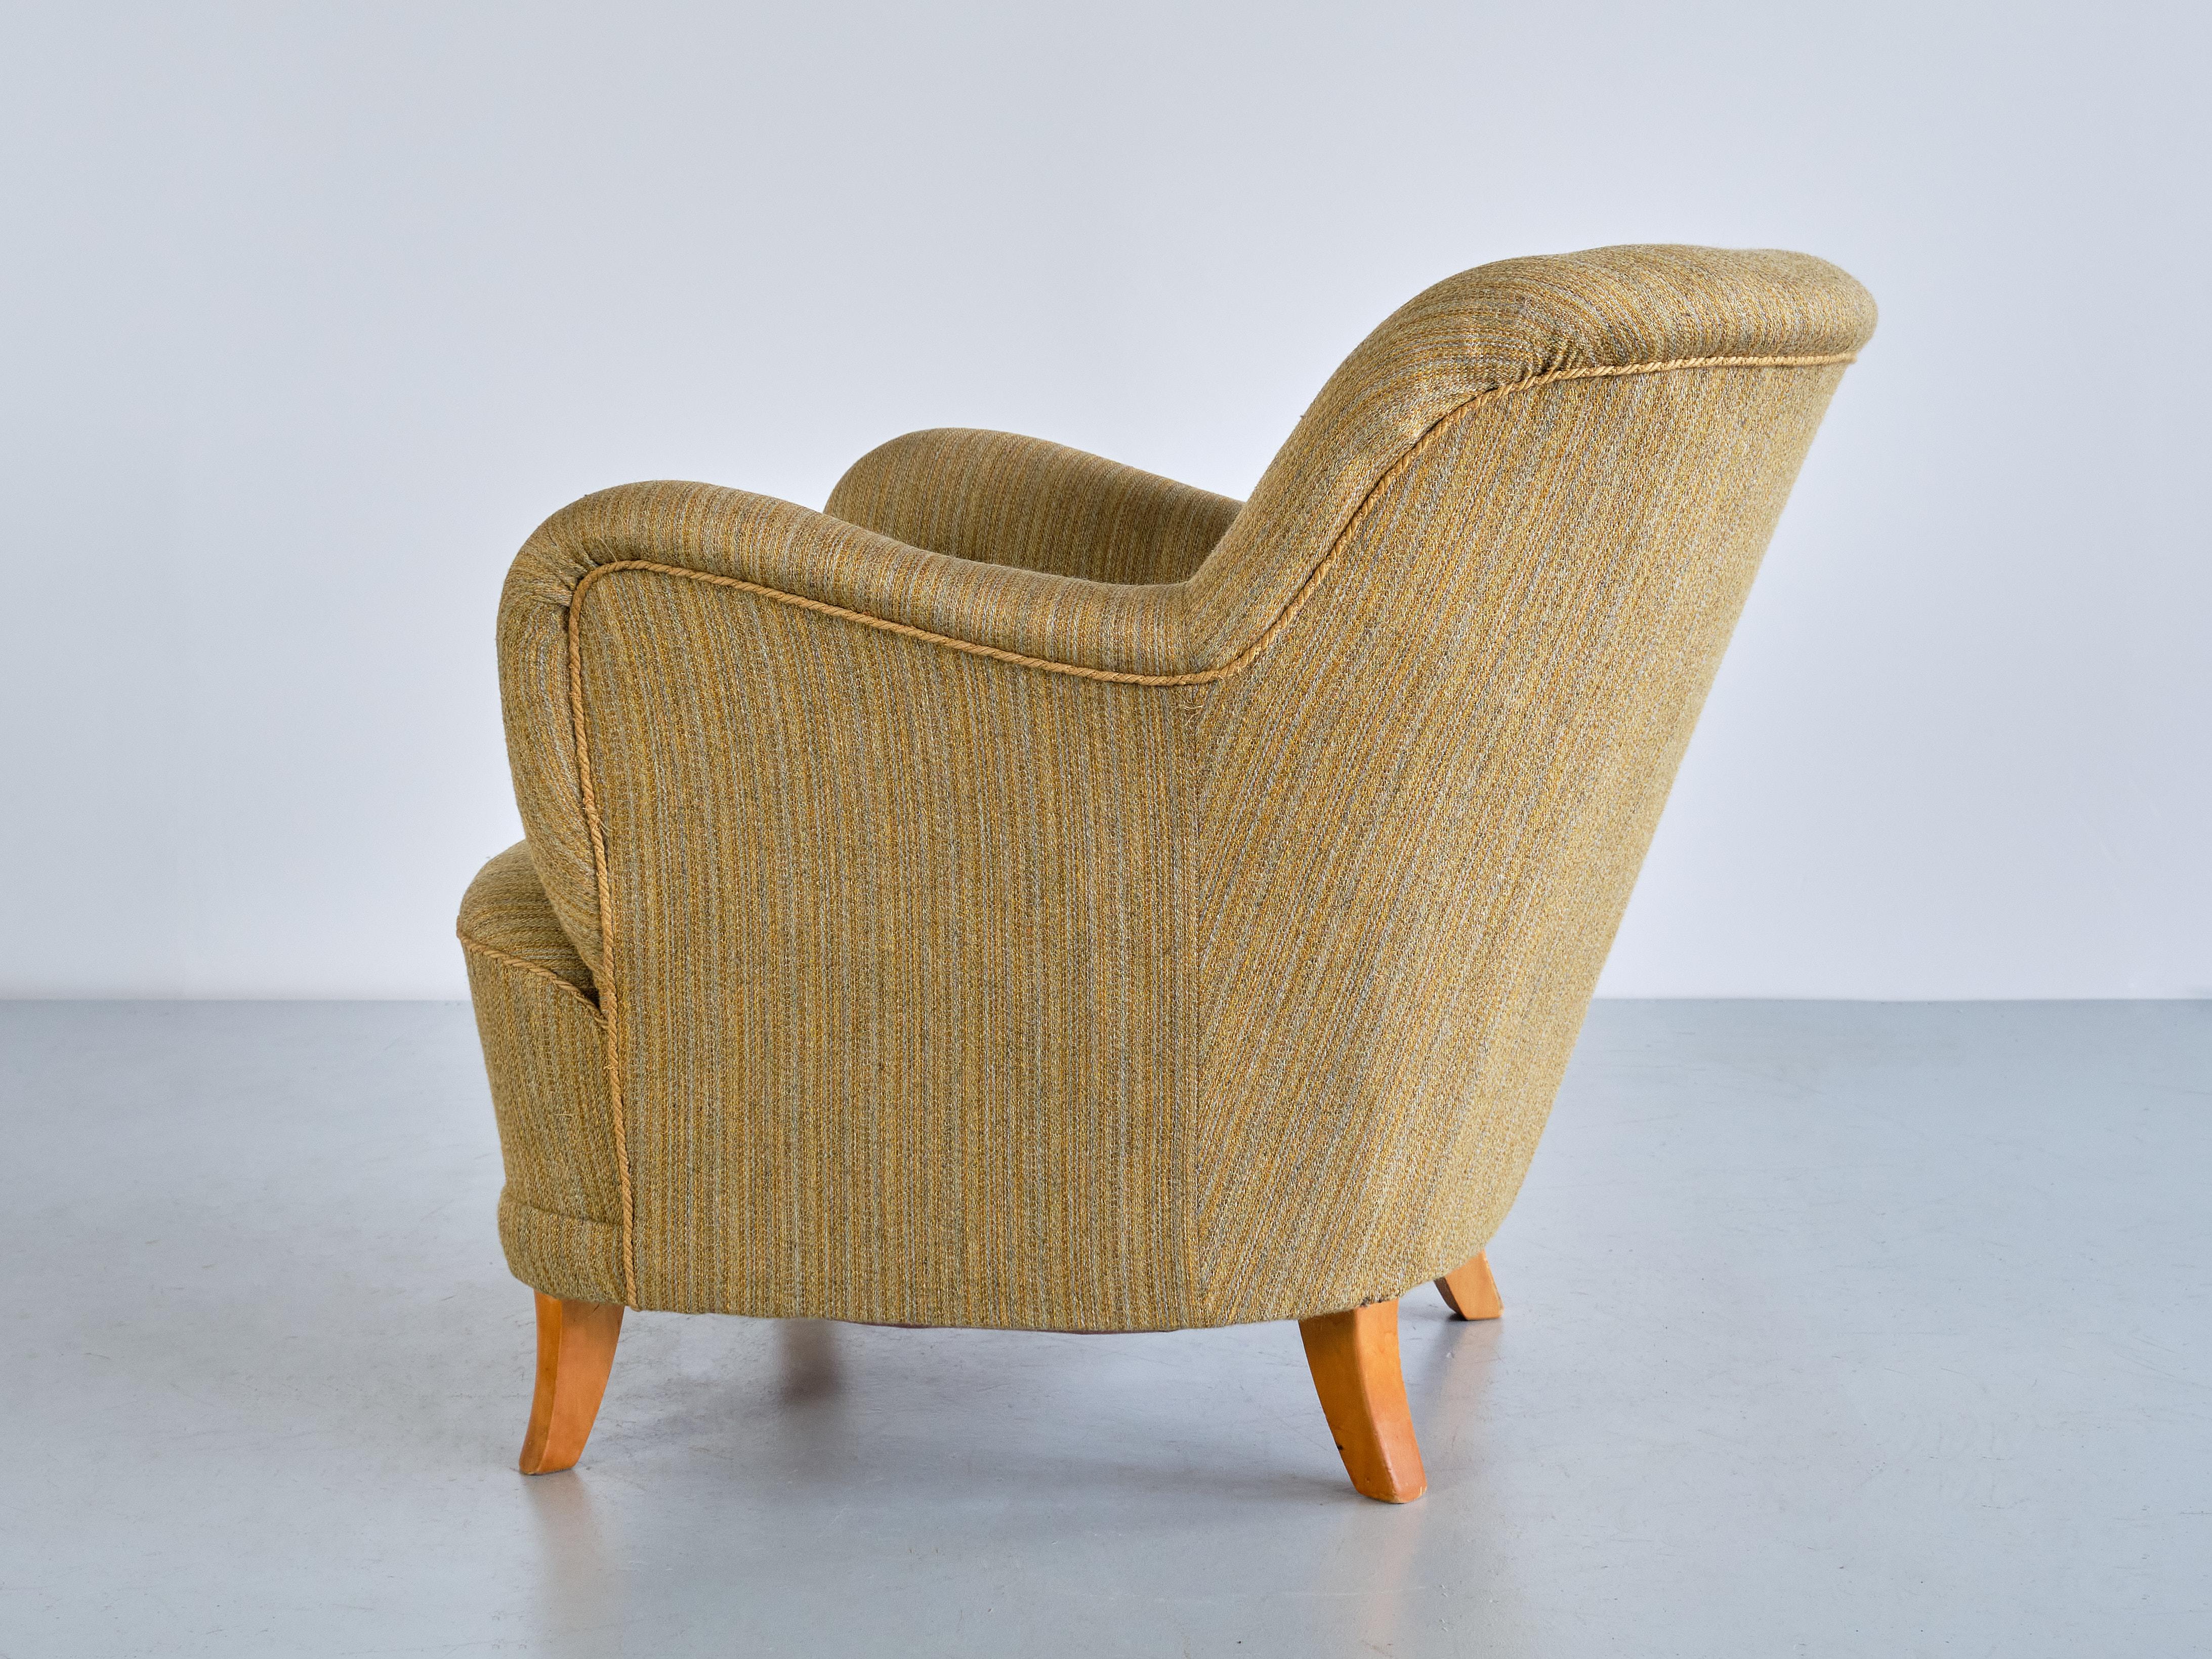 Sculptural Pair of Gustav Axel Berg Armchairs in Beech and Wool, Sweden, 1940s For Sale 2